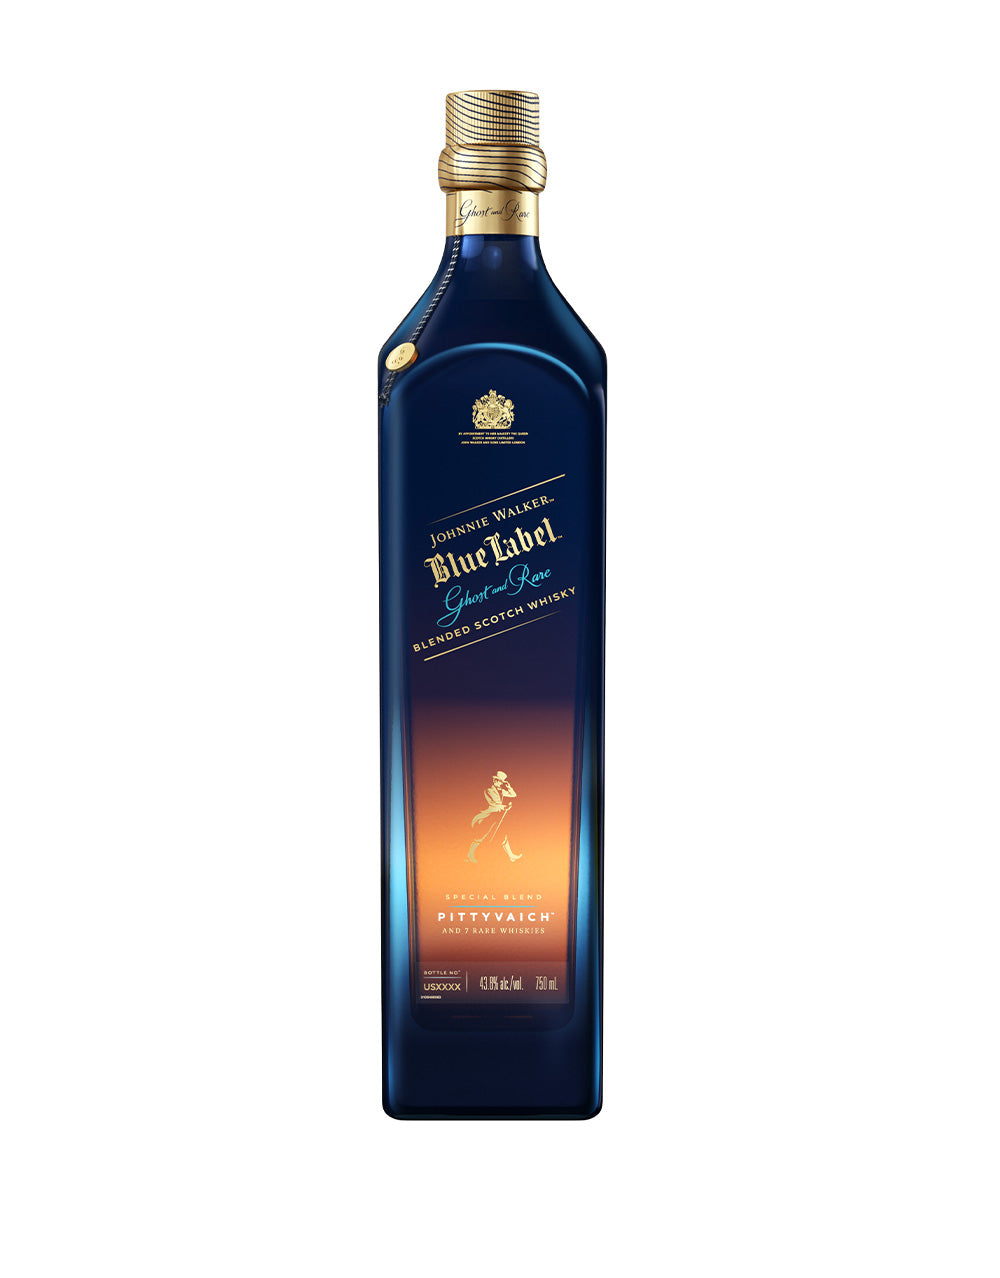 Minder dan Meter Mevrouw Johnnie Walker Blue Label Ghost and Rare Pittyvaich Blended Scotch Whisky |  ReserveBar